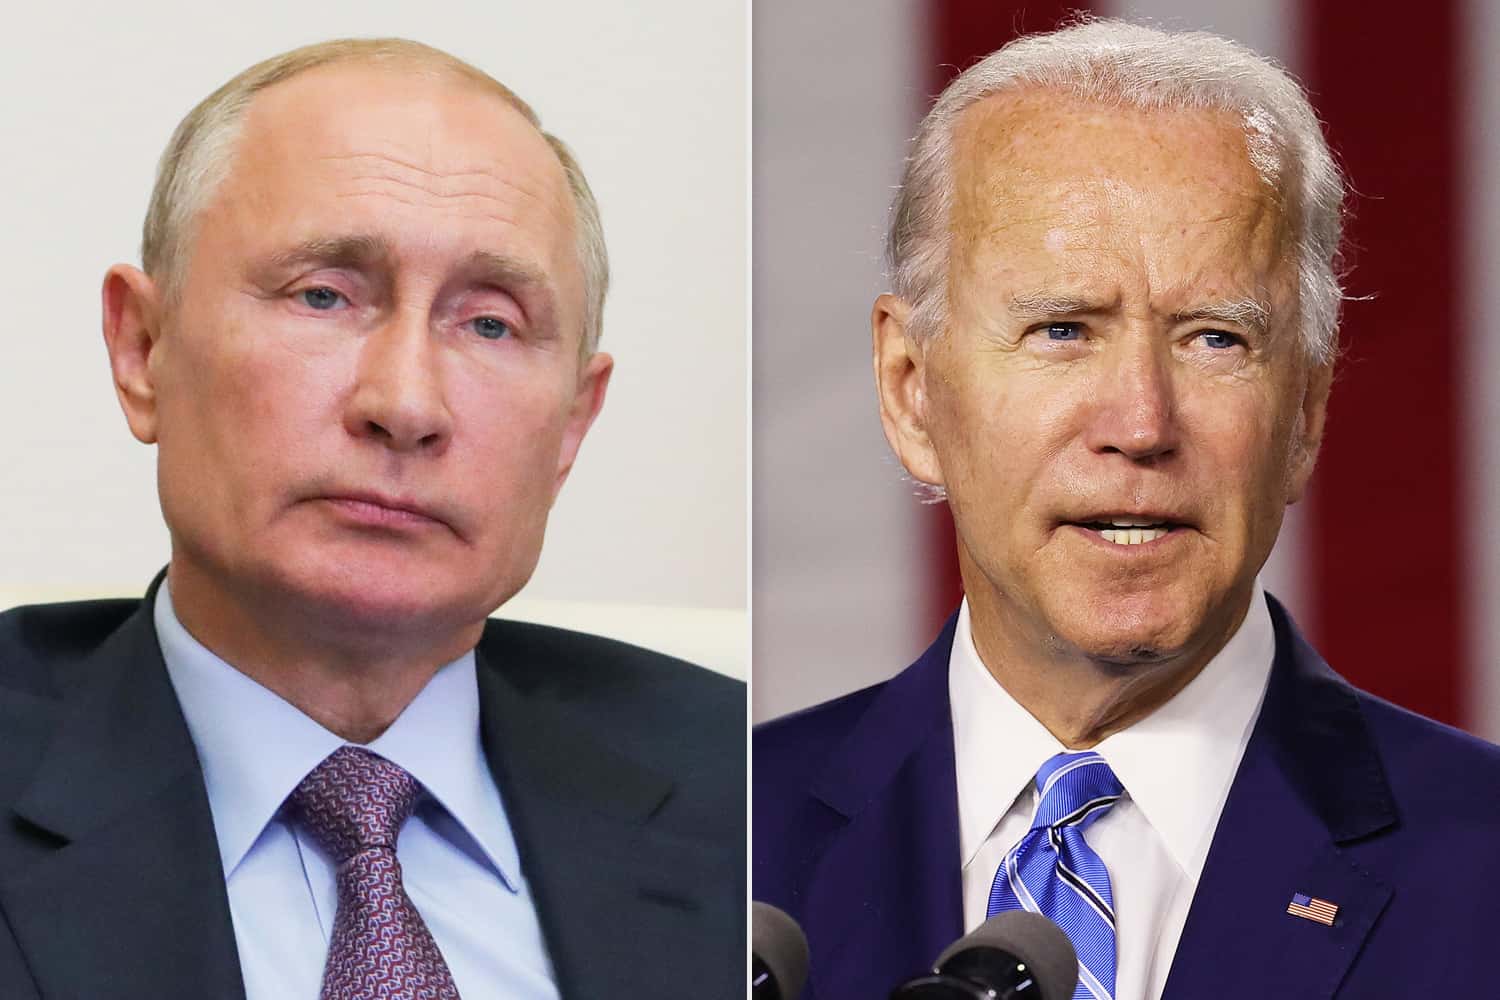 Russia reacts angrily after Biden calls Putin a ‘killer,’ will pay the price